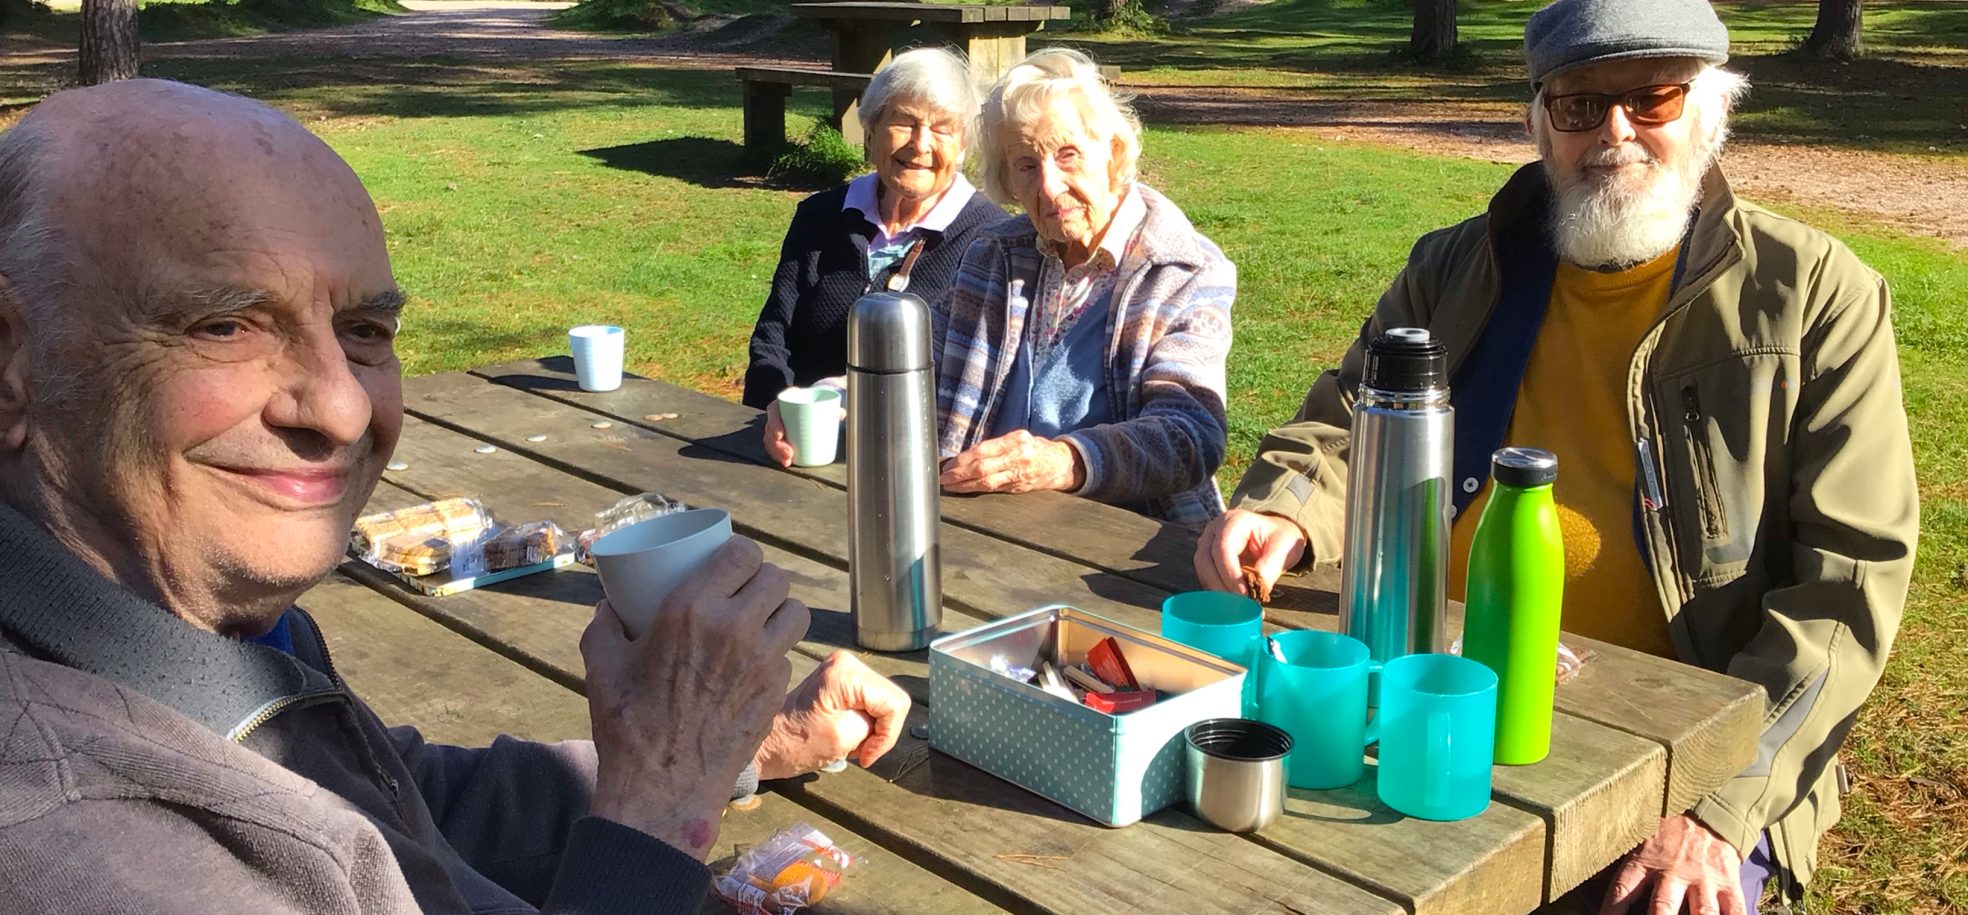 Residents from RMBI Home Cadogan Court, in Exeter, enjoyed a lively chat at the park’s picnic benches at Haldon Forest